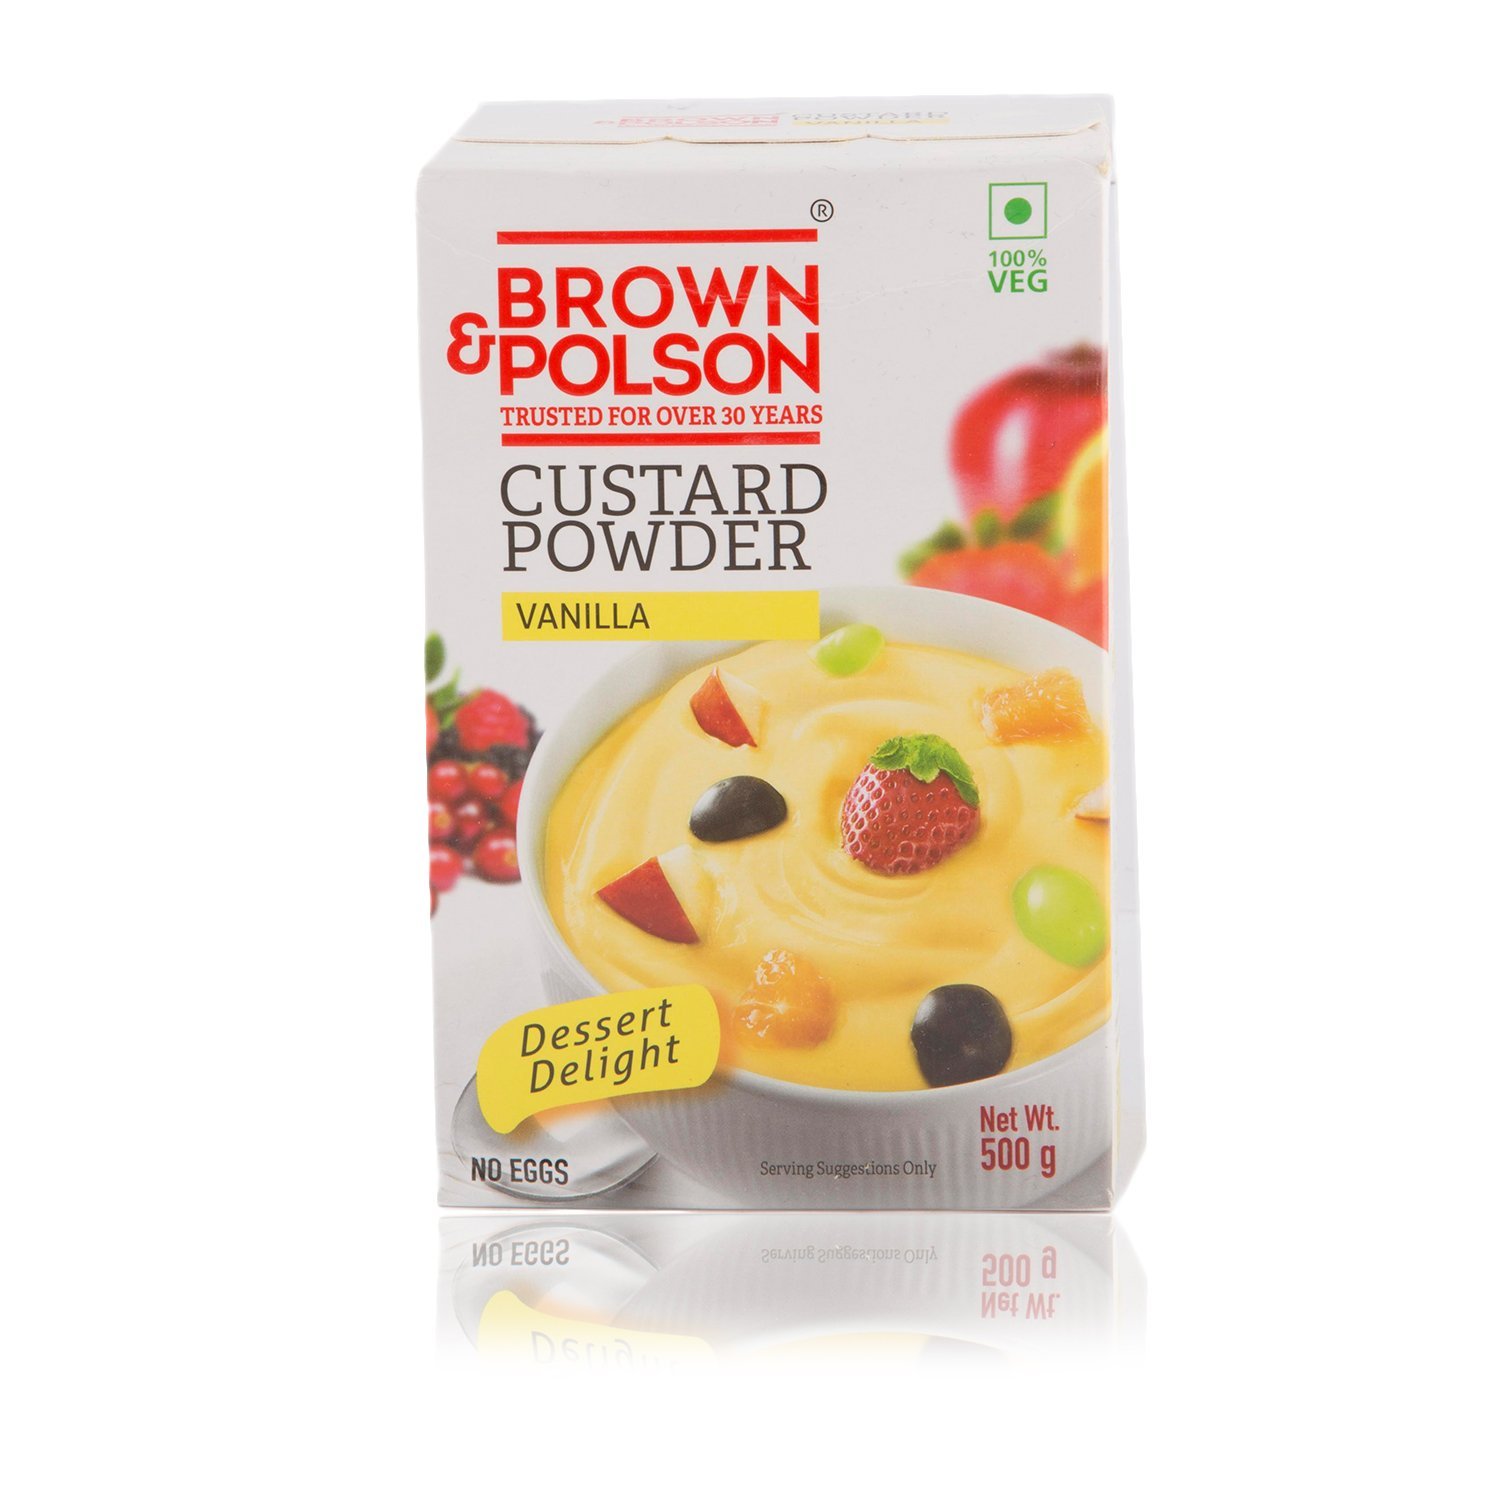 BROWN & POLSON CUSTARD POWDER Photos, Images and Wallpapers